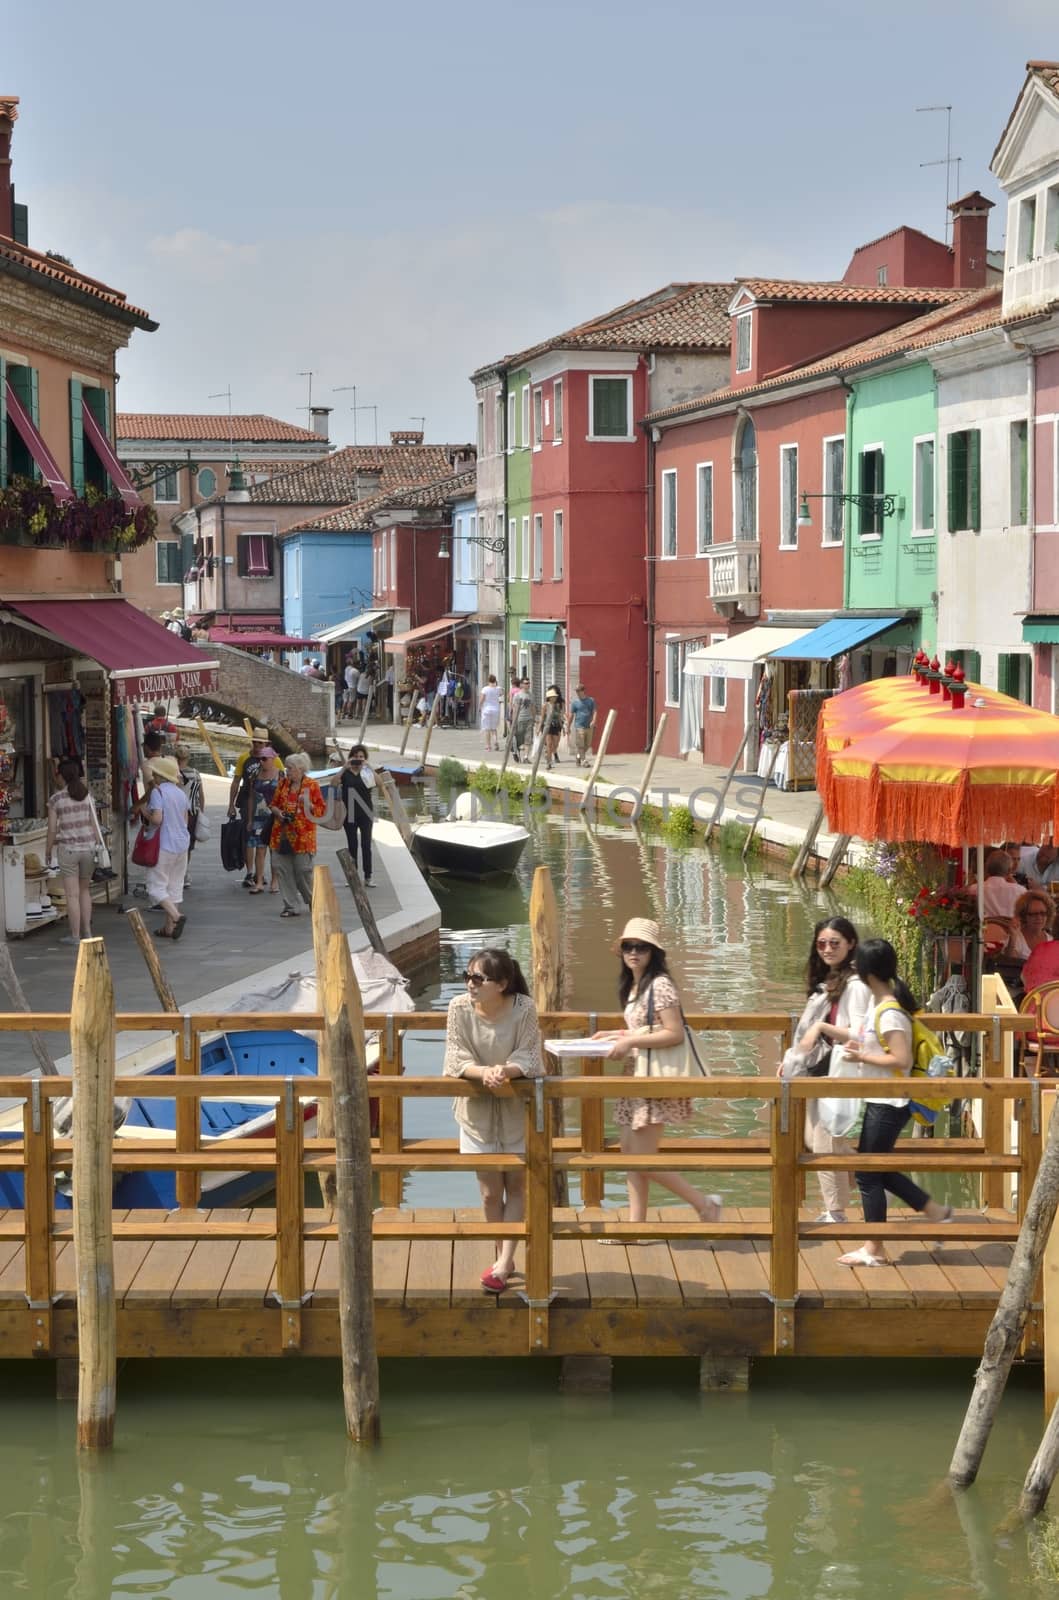 Some tourists on a wooden bridge over a canal  in Burano, a colorful island of Venice, Italy